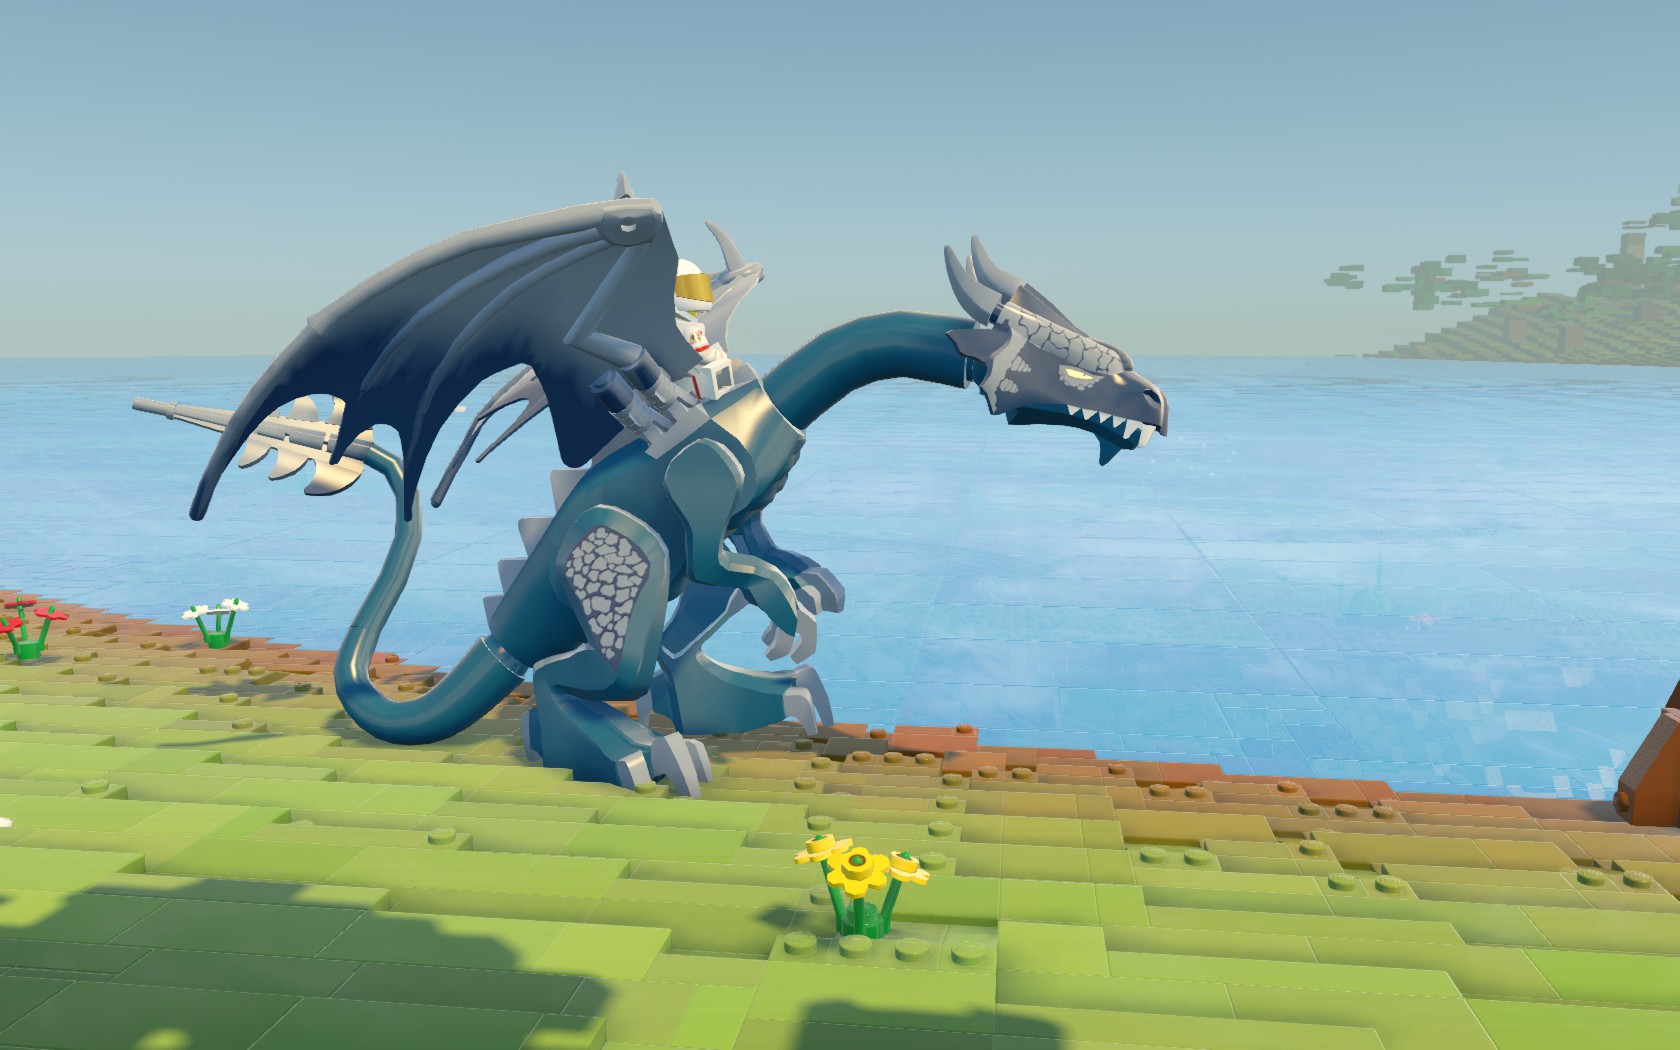 how to get dragons in lego worlds ps4